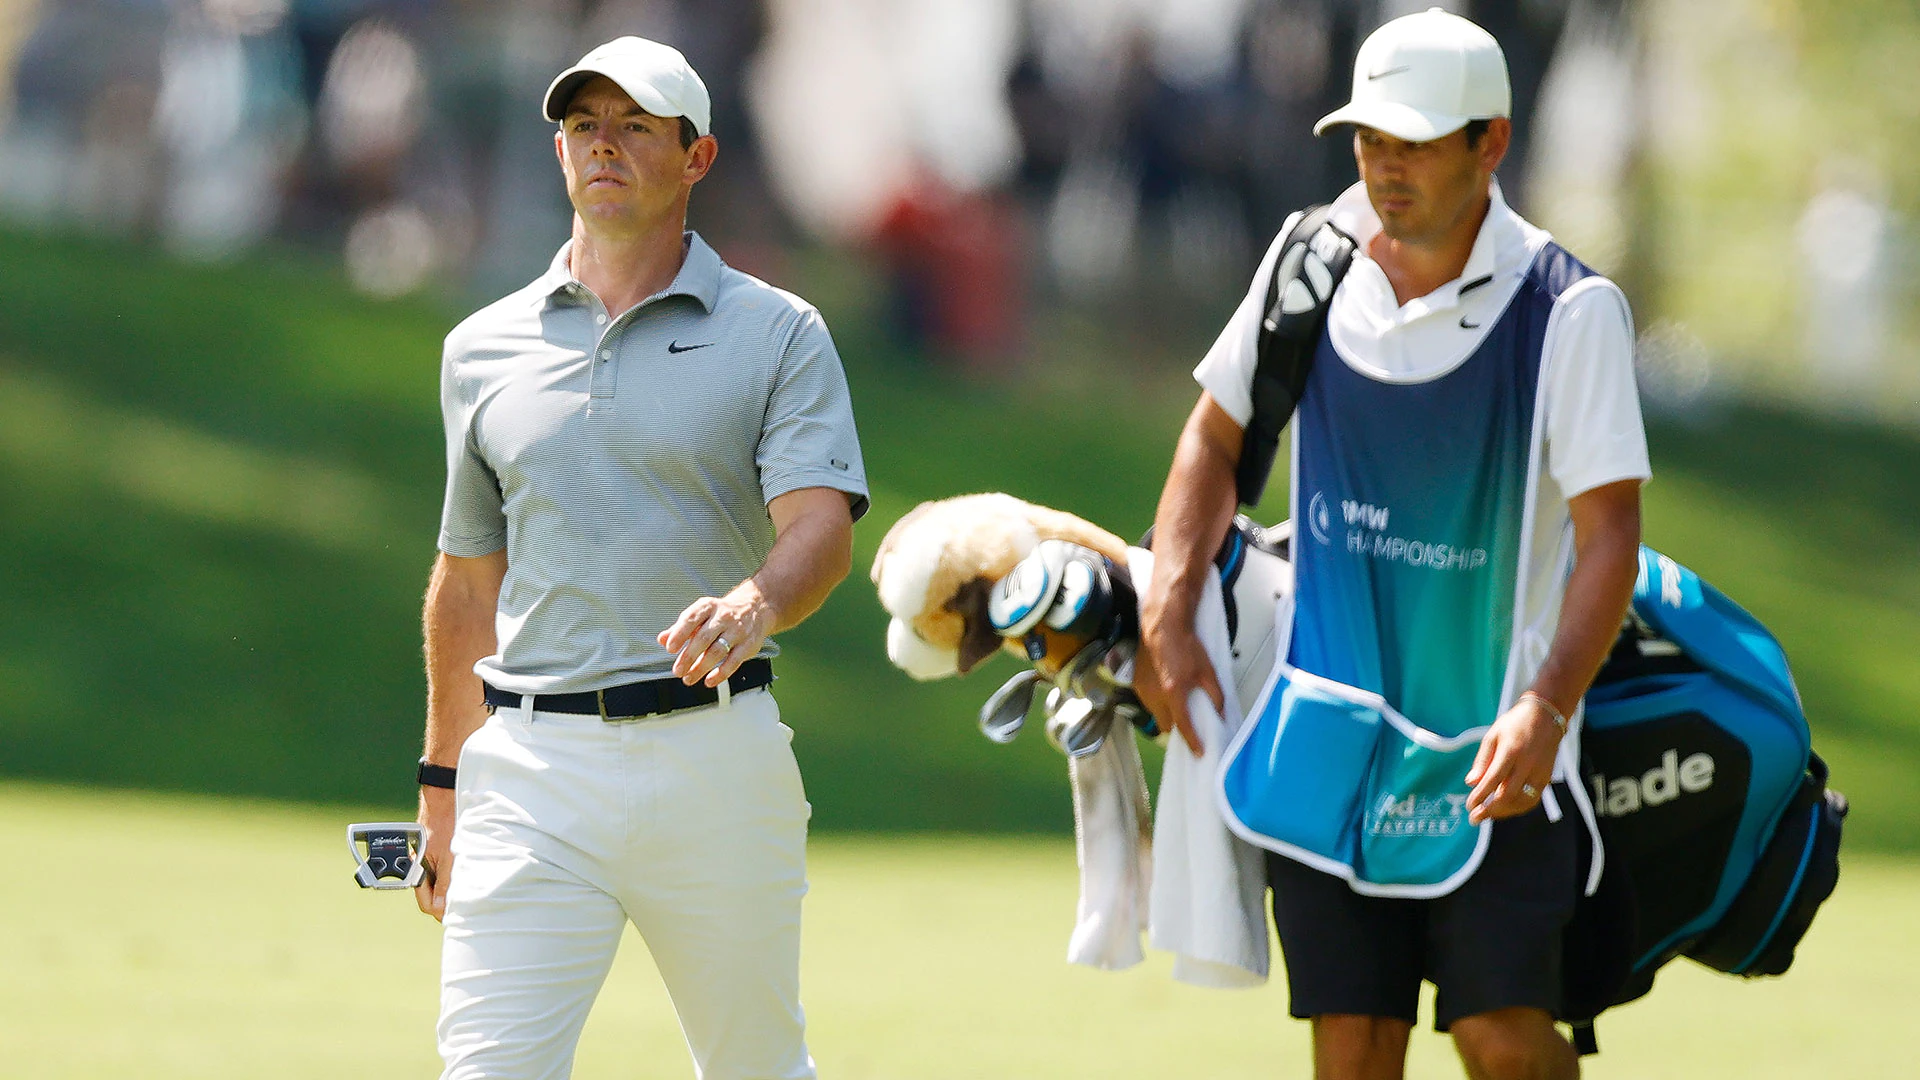 Rory McIlroy fires 64 after digging through garage for 3-wood and putter